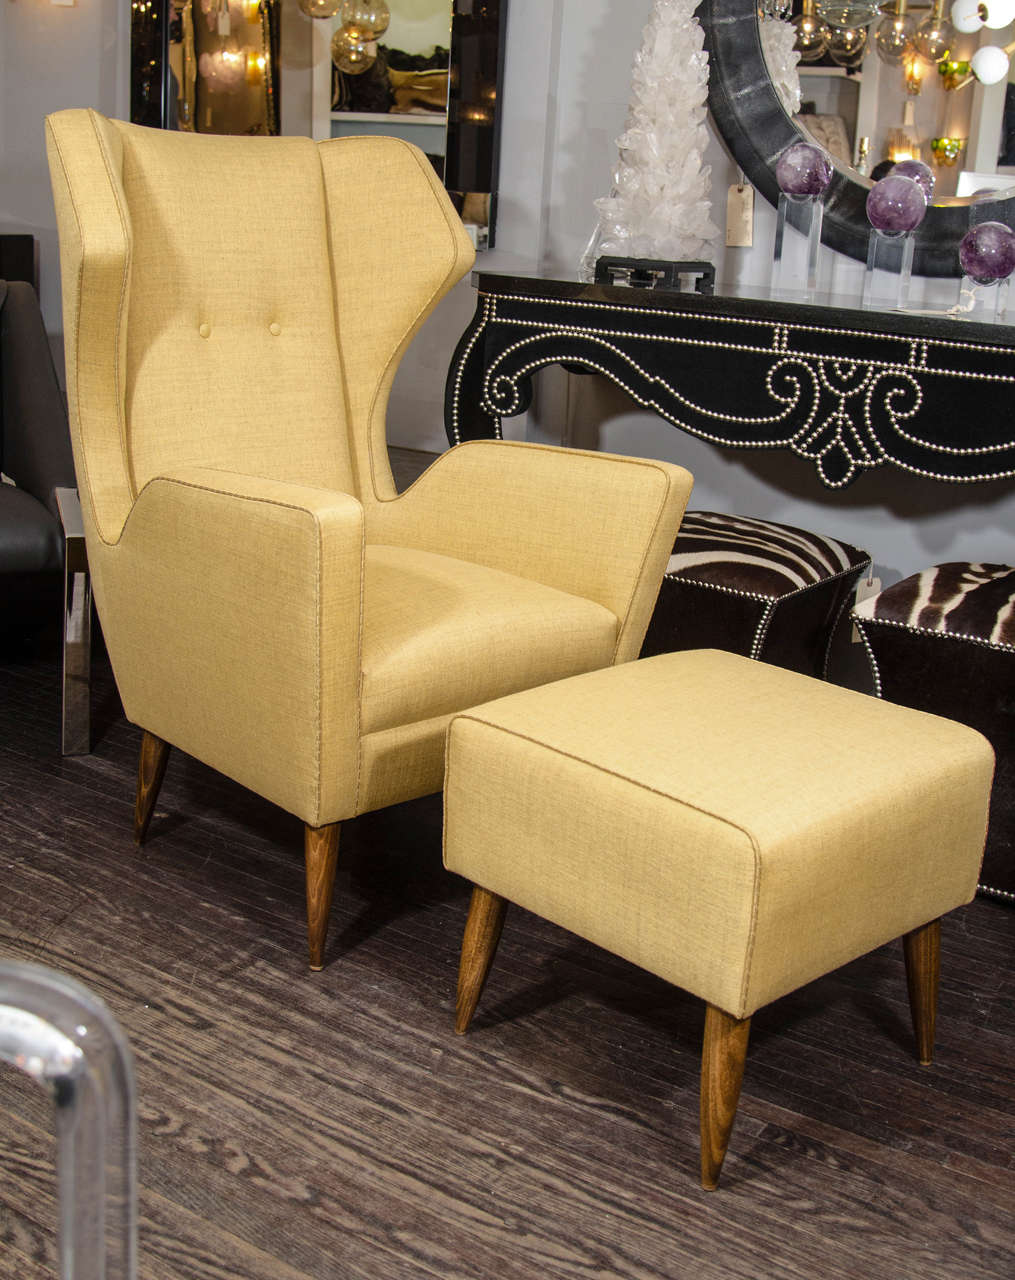 Custom Gio Ponti style chair and ottoman in mustard color. Customization is available in different fabrics or COM (Customer Own Material)